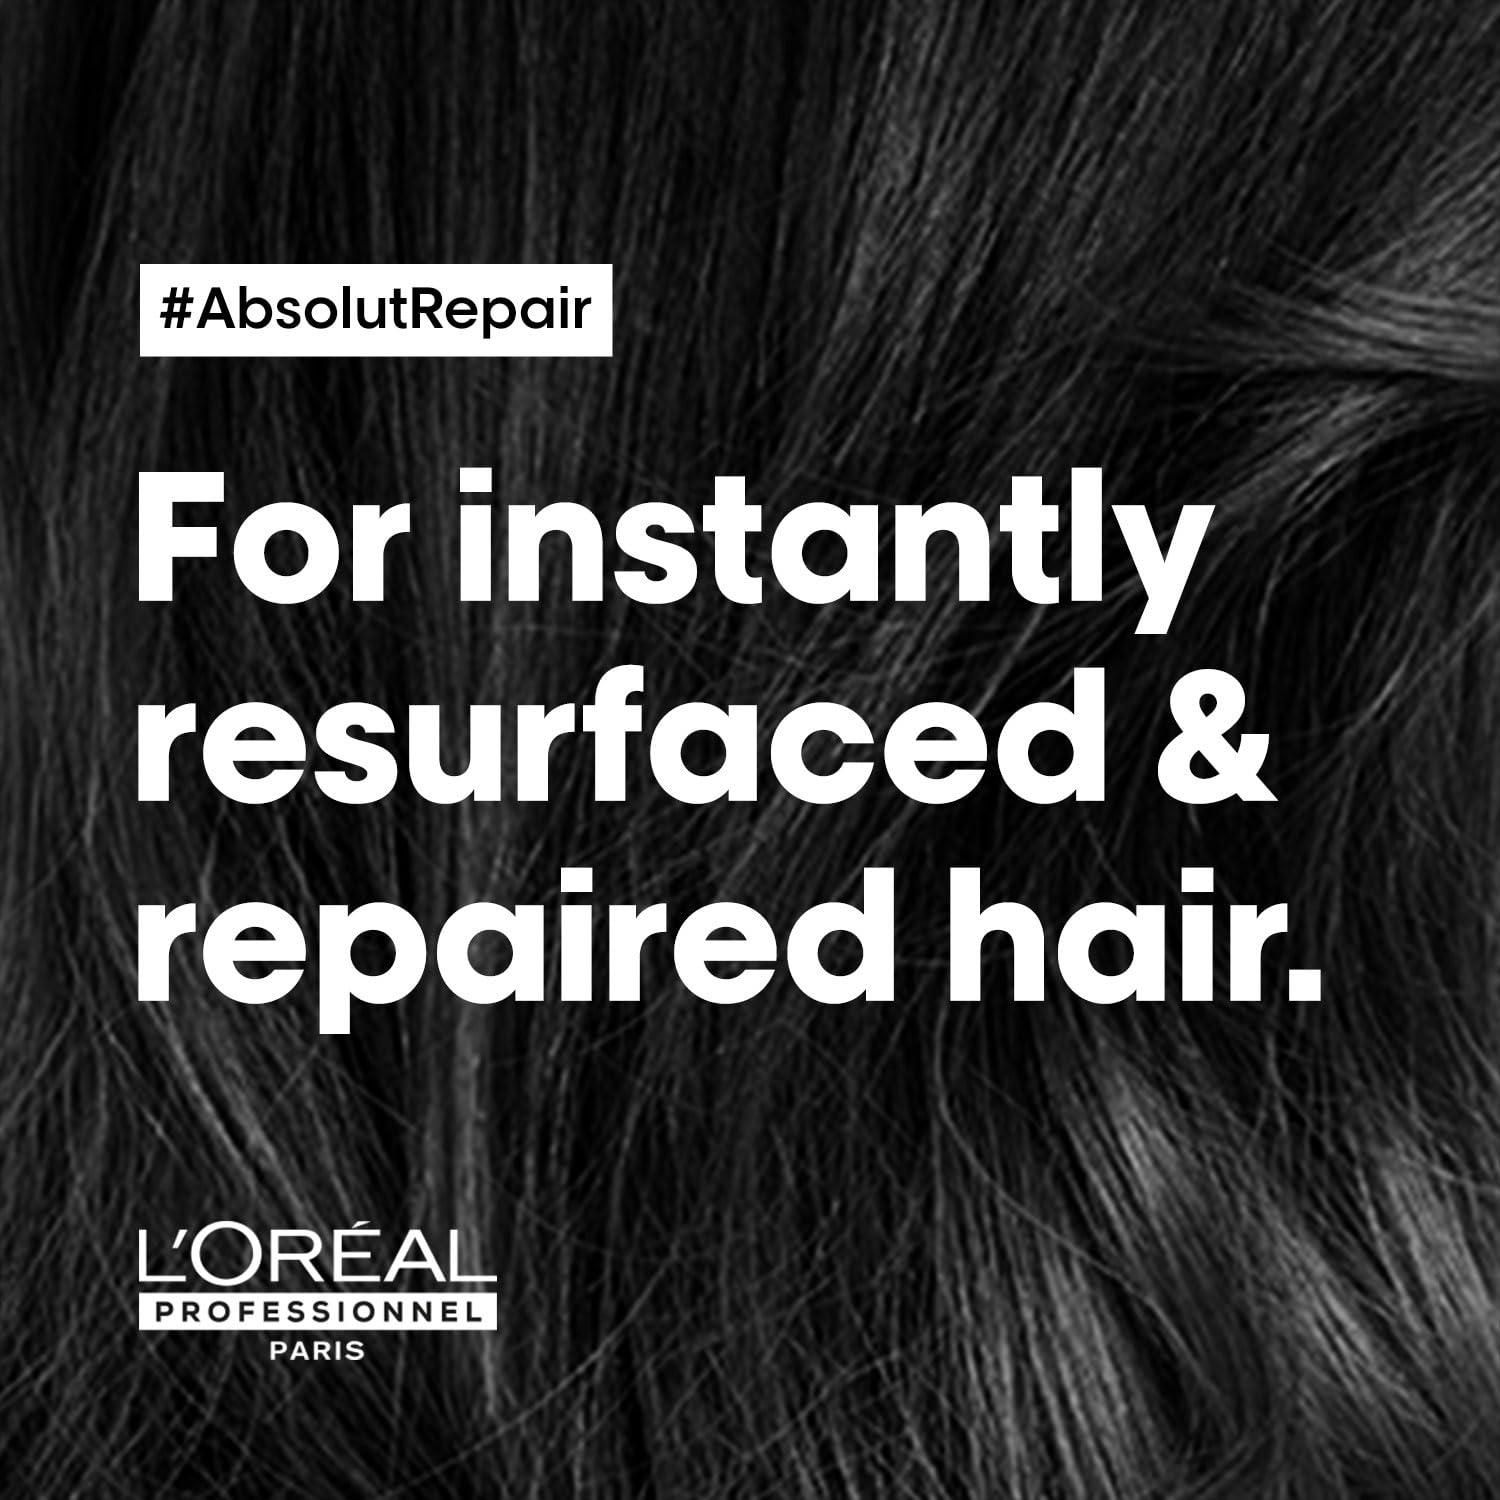 L'OREAL PROFESSIONNEL PARIS Absolut Repair Shampoo For Damaged & Weakend Hair, 300ML |Professional Hair Repairing Shampoo|Hair Strengthening Shampoo Shampoo from loreal pro paris